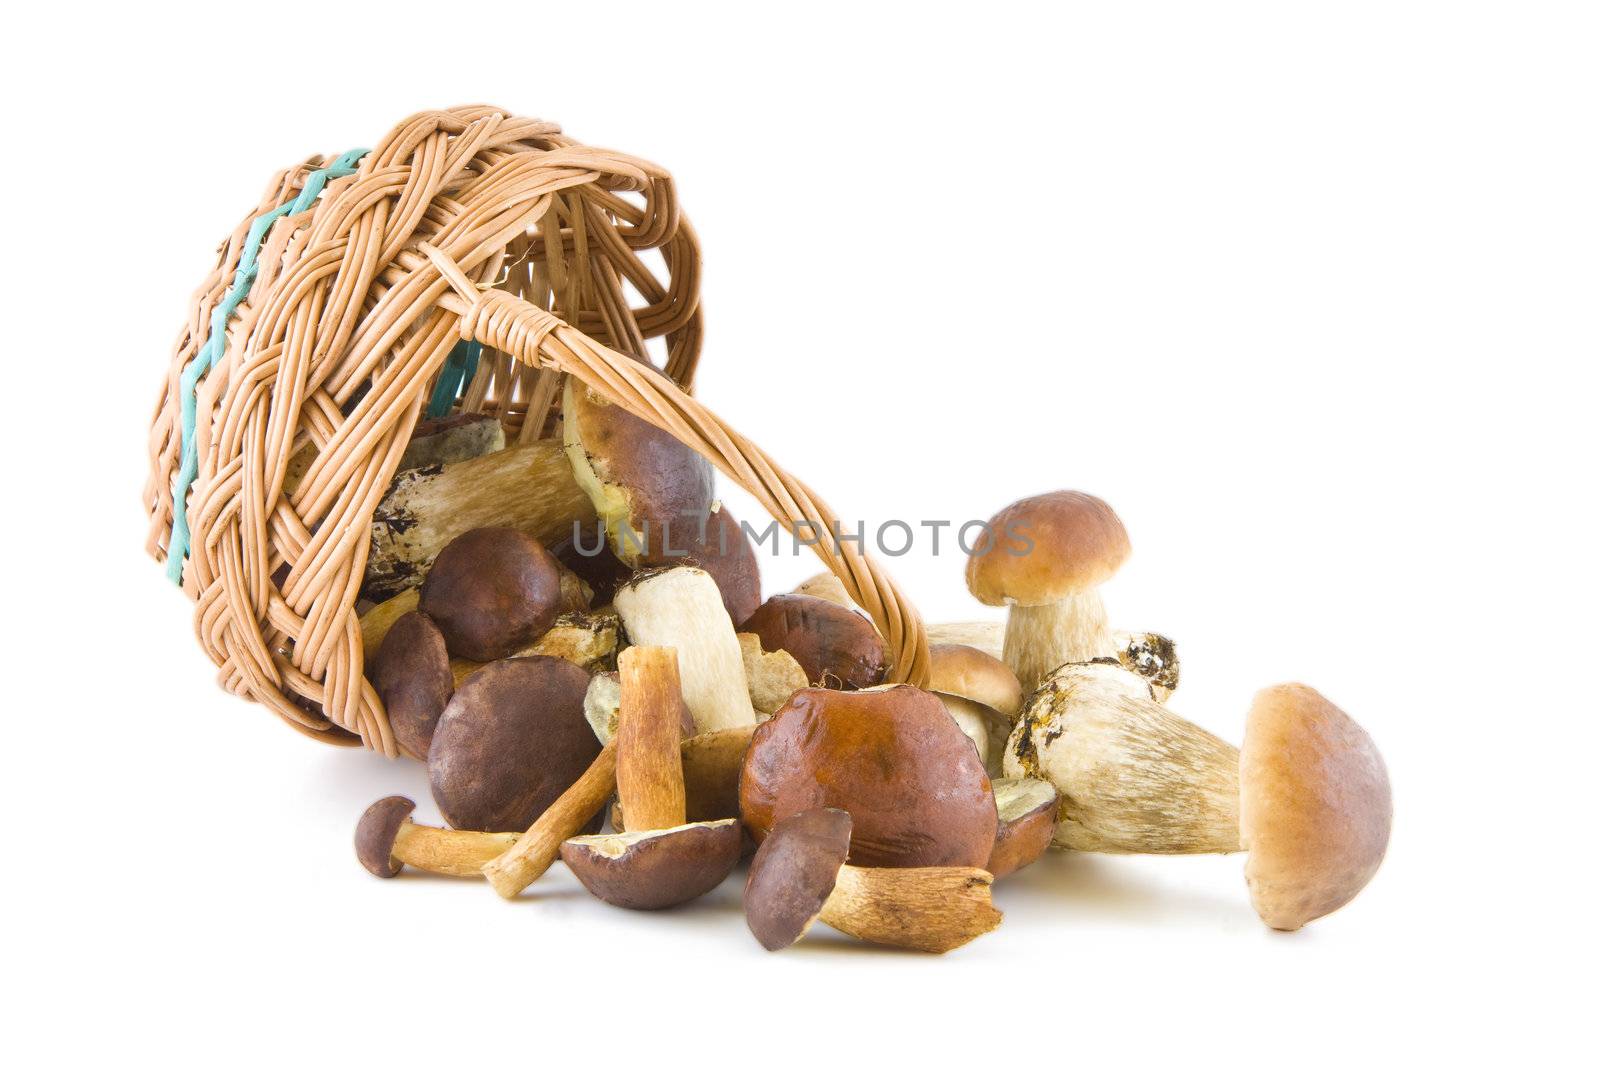 Boletus mushrooms with a wicker basket isolated on white background